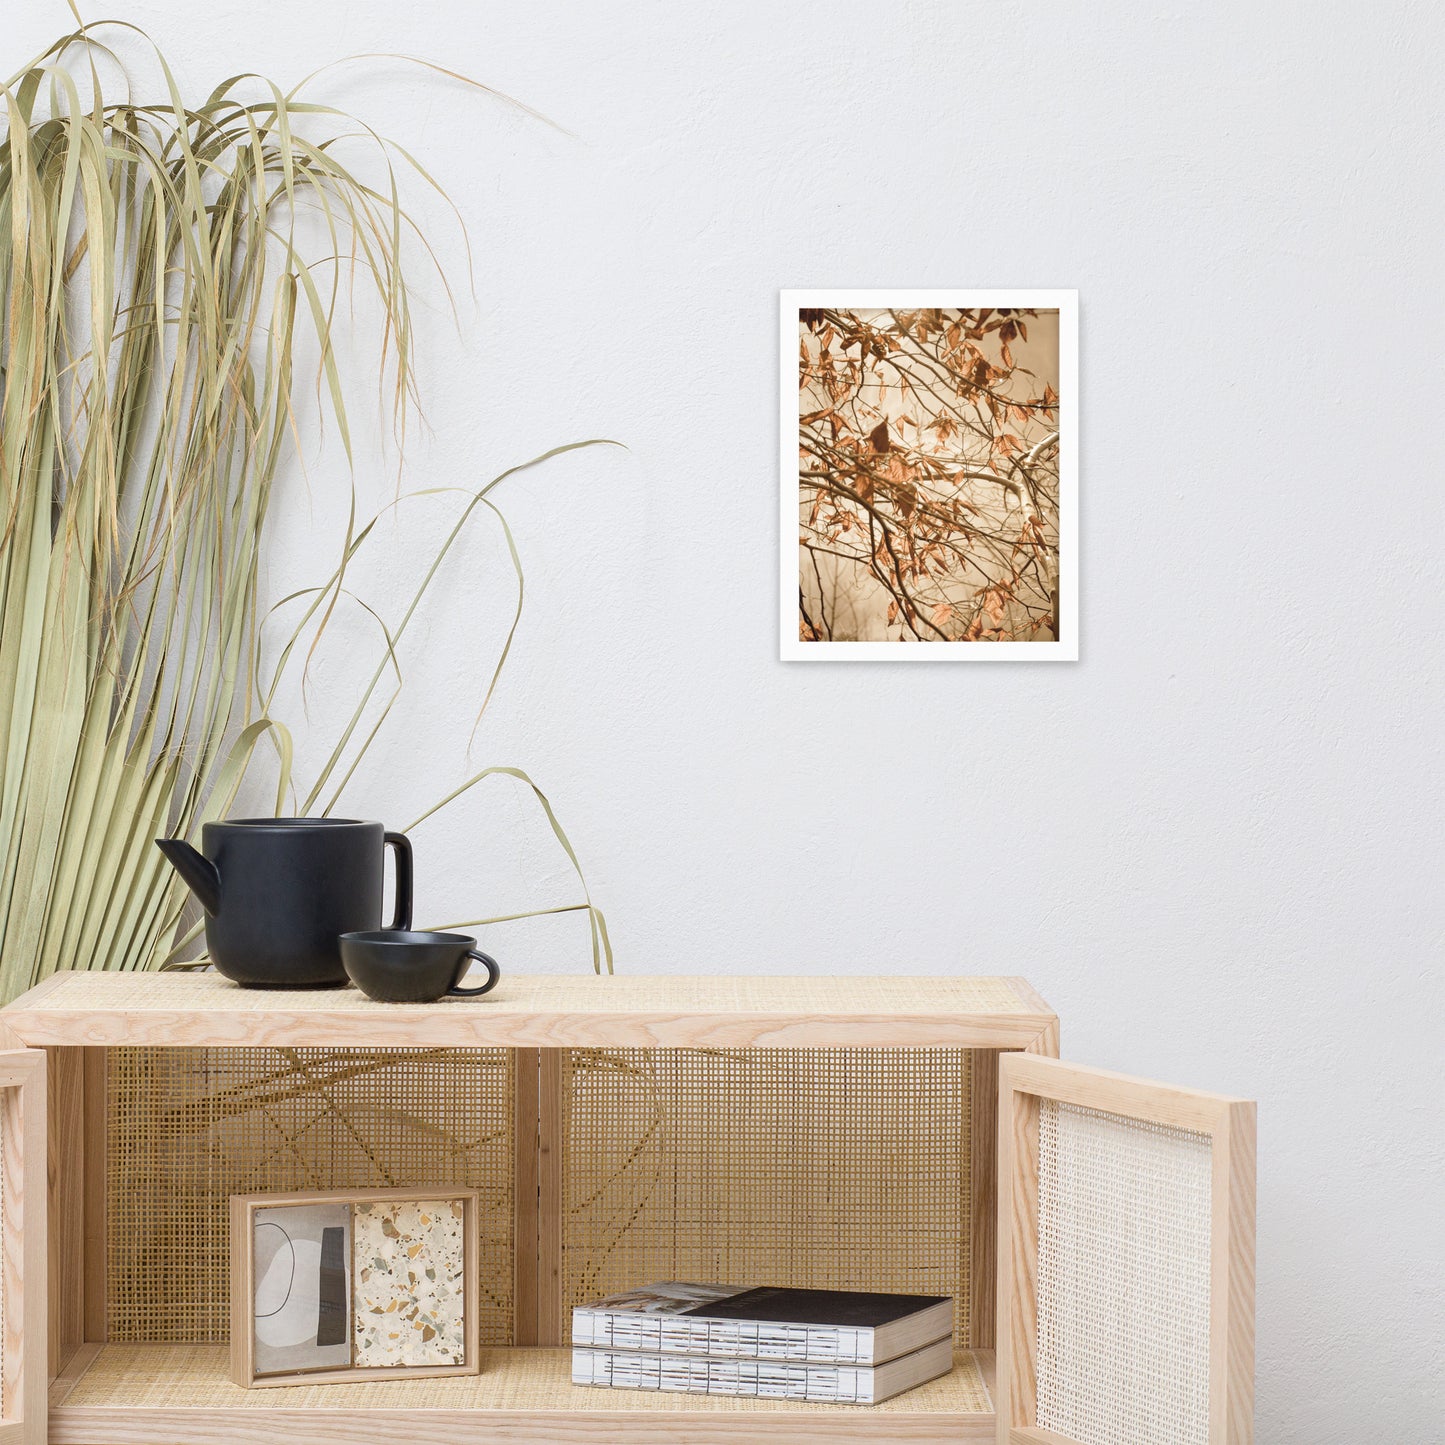 Wall Art For Entry Hall: Aged Winter Leaves Botanical / Nature Photo Framed Wall Art Print - Artwork - Farmhouse Style Wall Decor